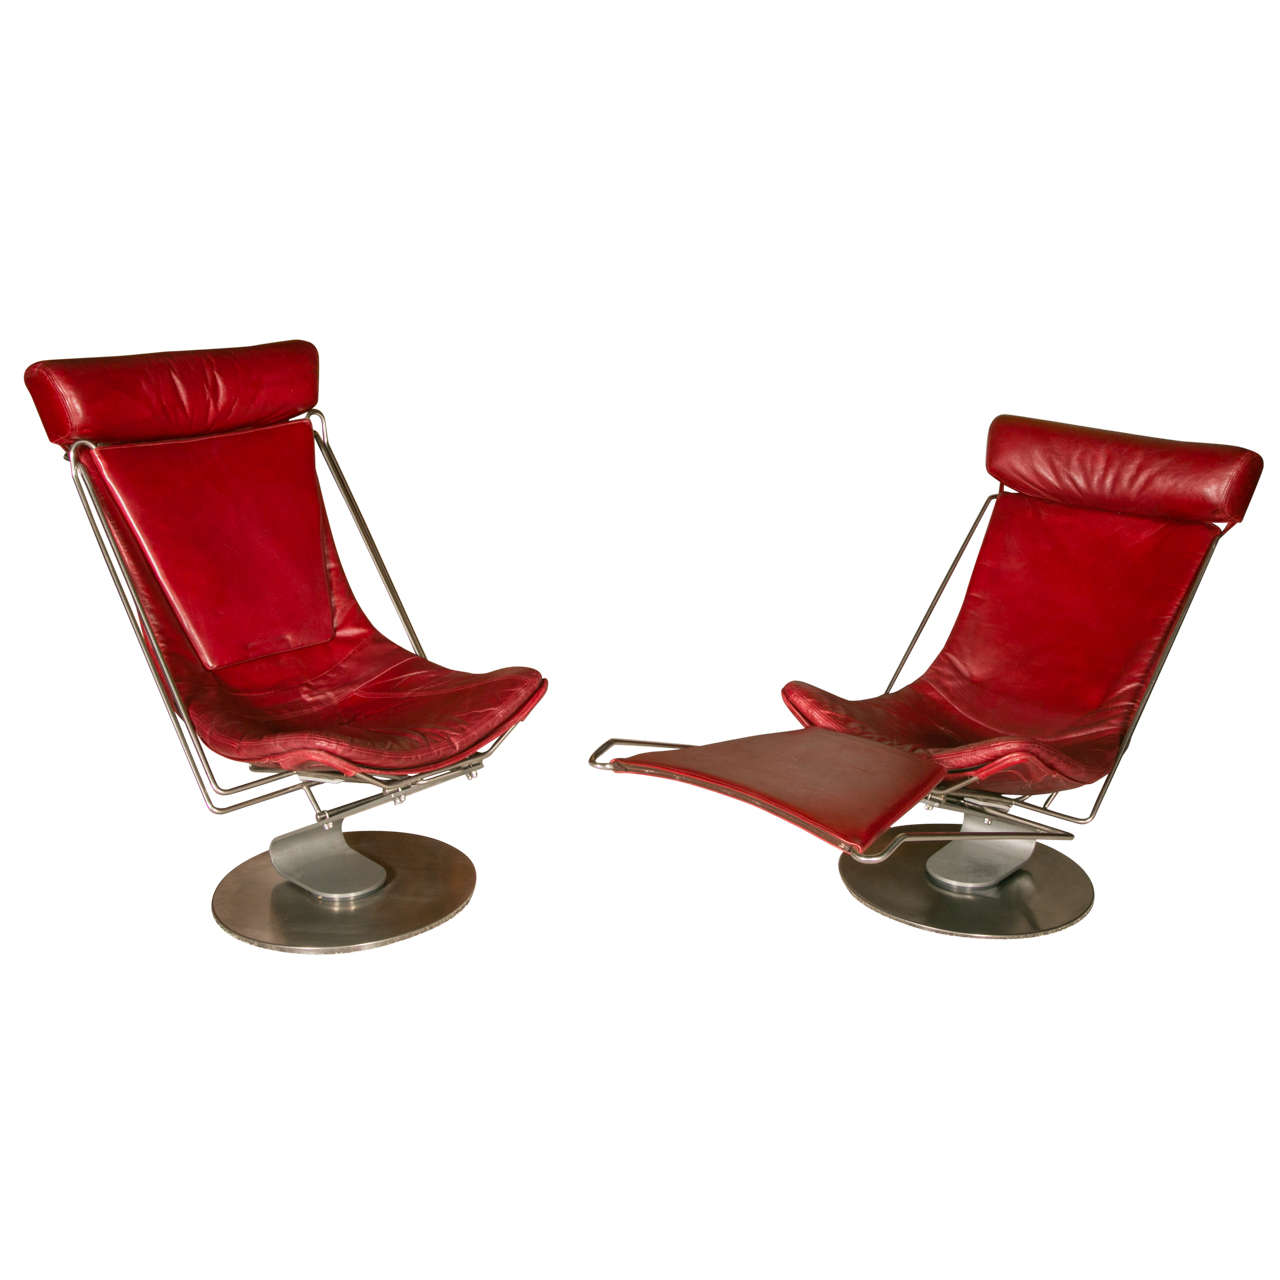 Pair of Stainless Steel and Red Leather Armchairs For Sale